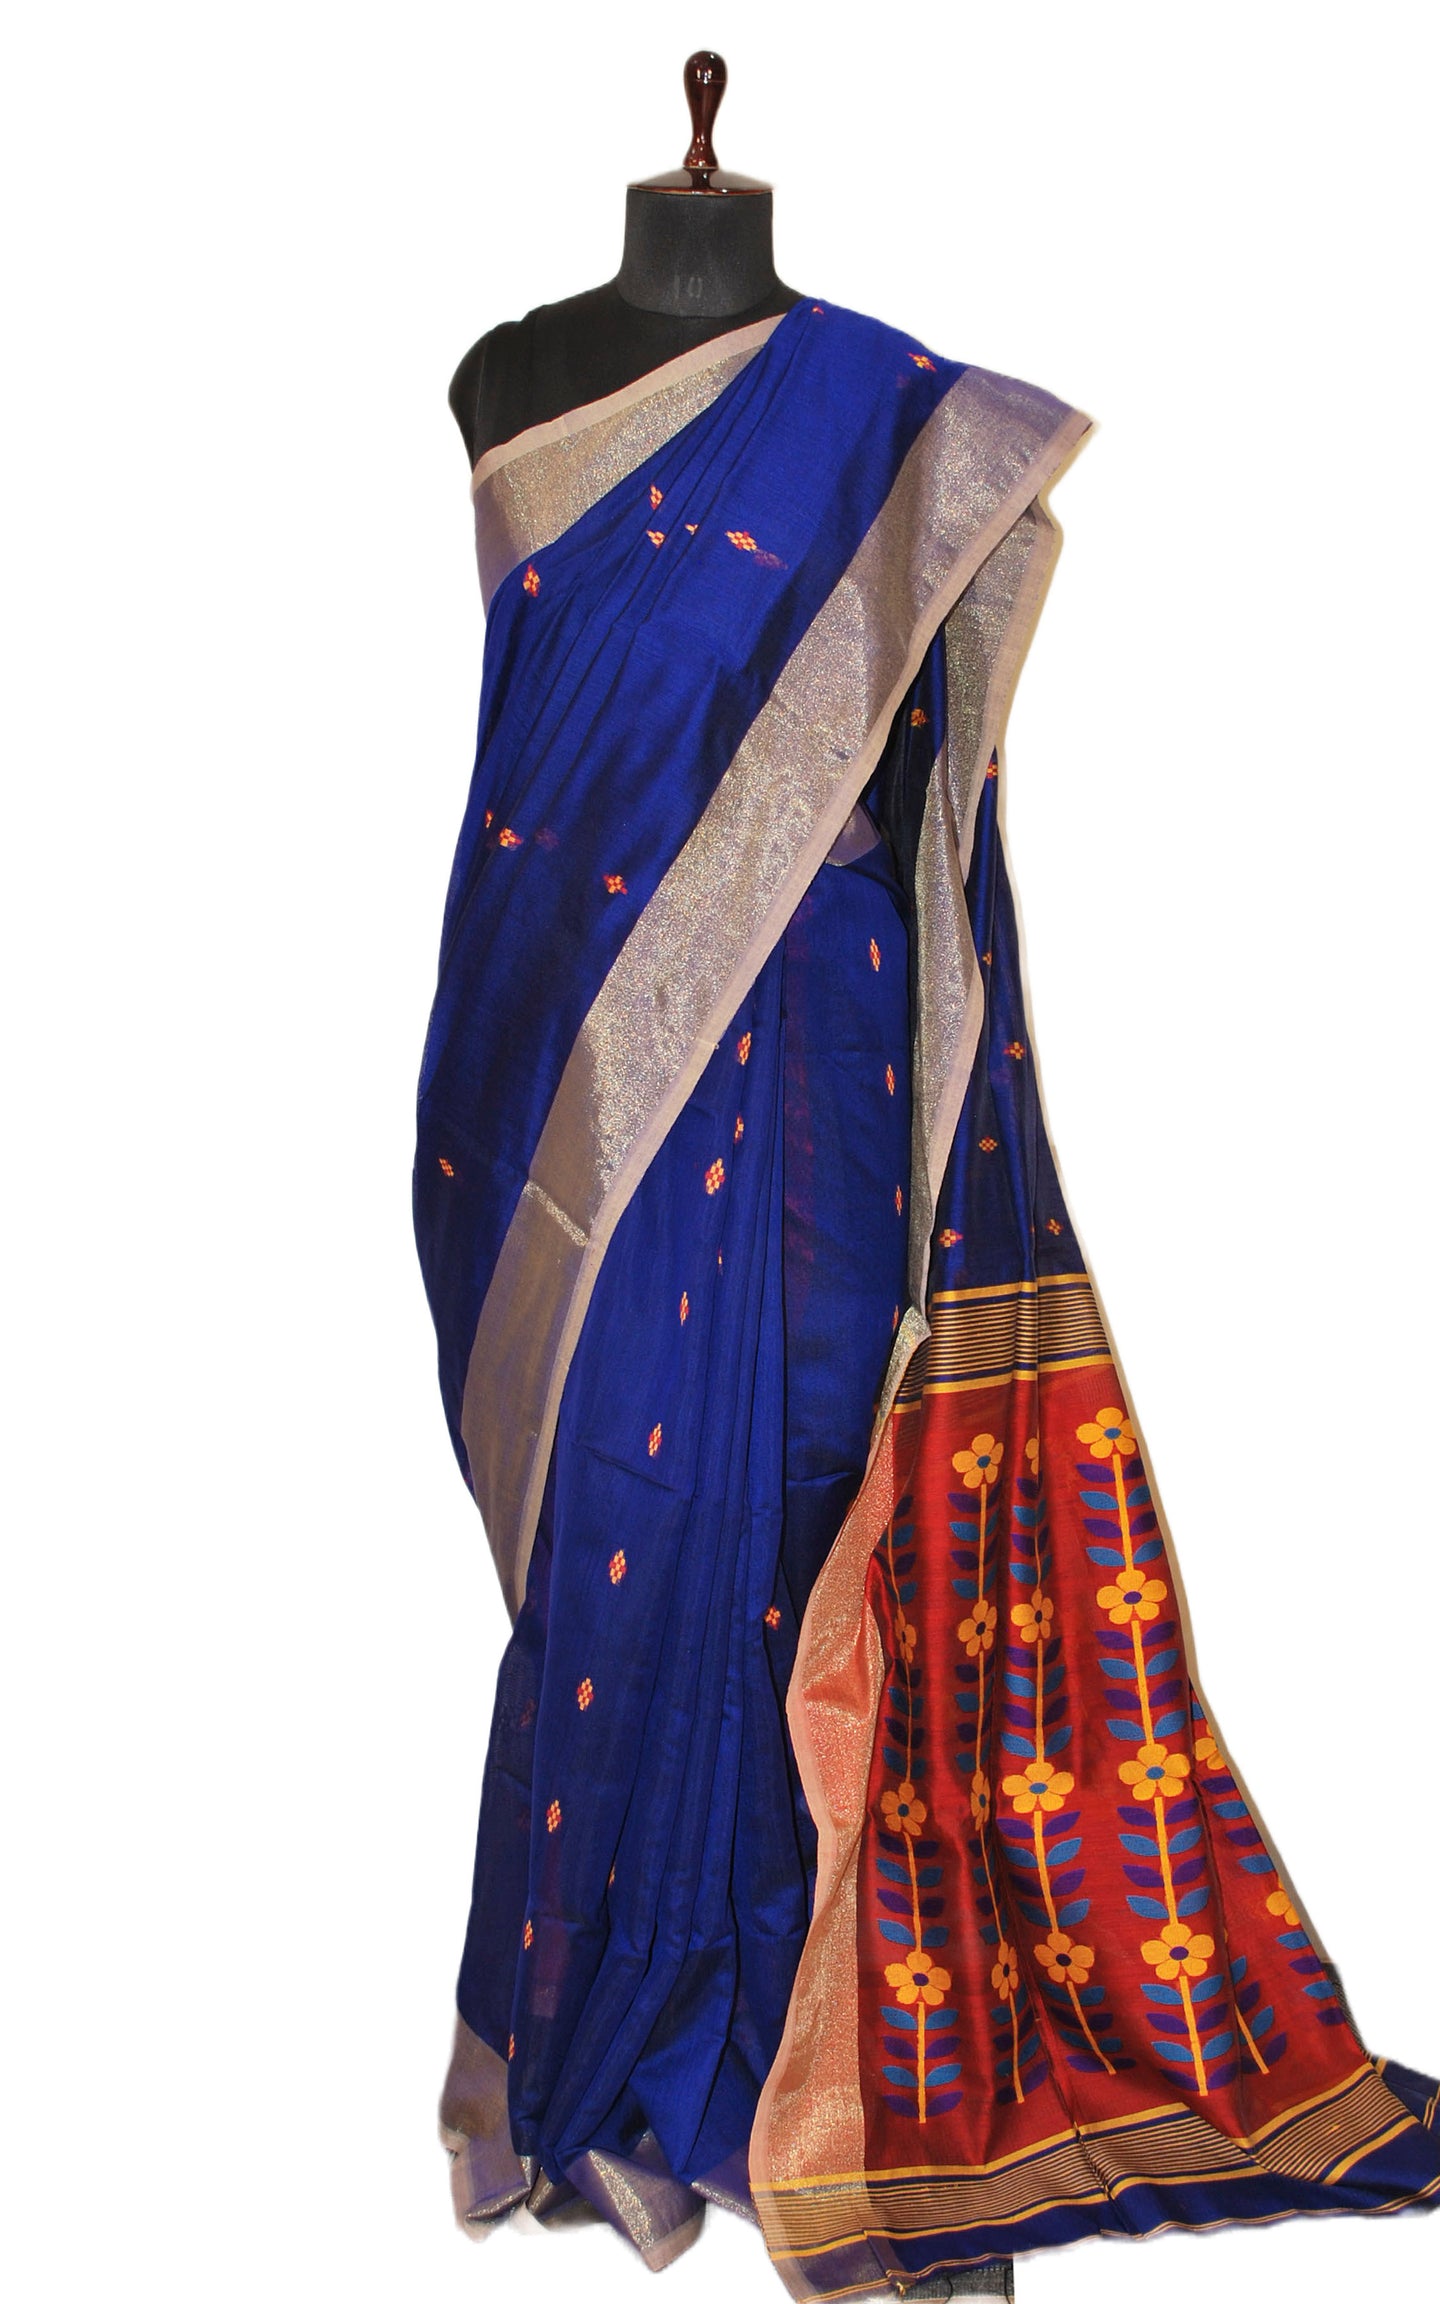 Blended Cotton Silk Jamdani Saree in Navy Blue, Golden Yellow, Black and Venetian Red